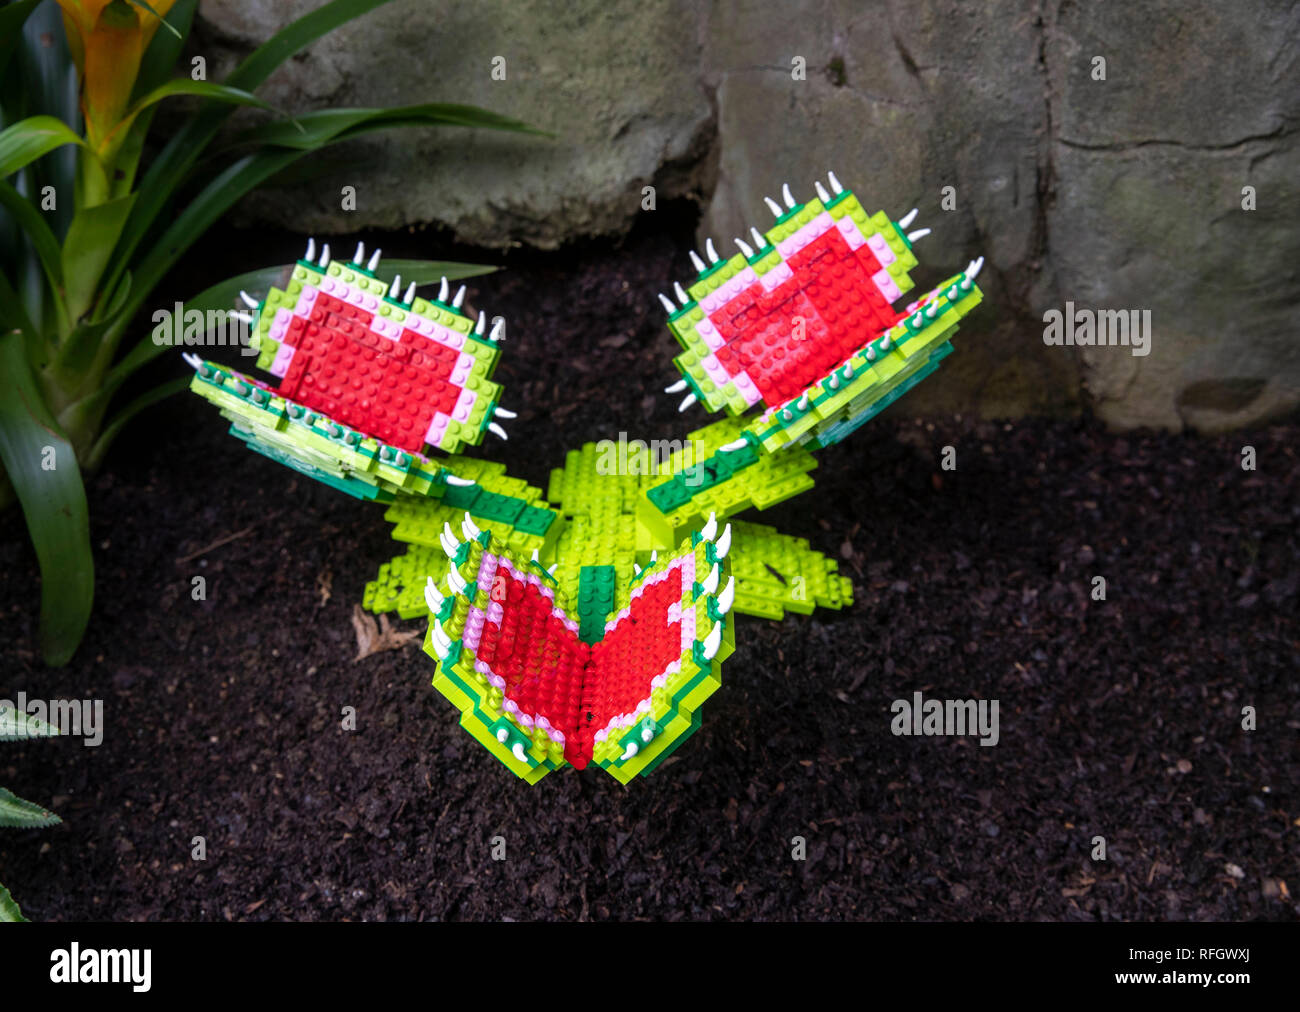 A Lego Venus flytrap, one of 40 Lego sculptures going on display as part of the Great Brick Safari in the glasshouse at RHS Garden Wisley, which runs from January 26 to March 3. Stock Photo